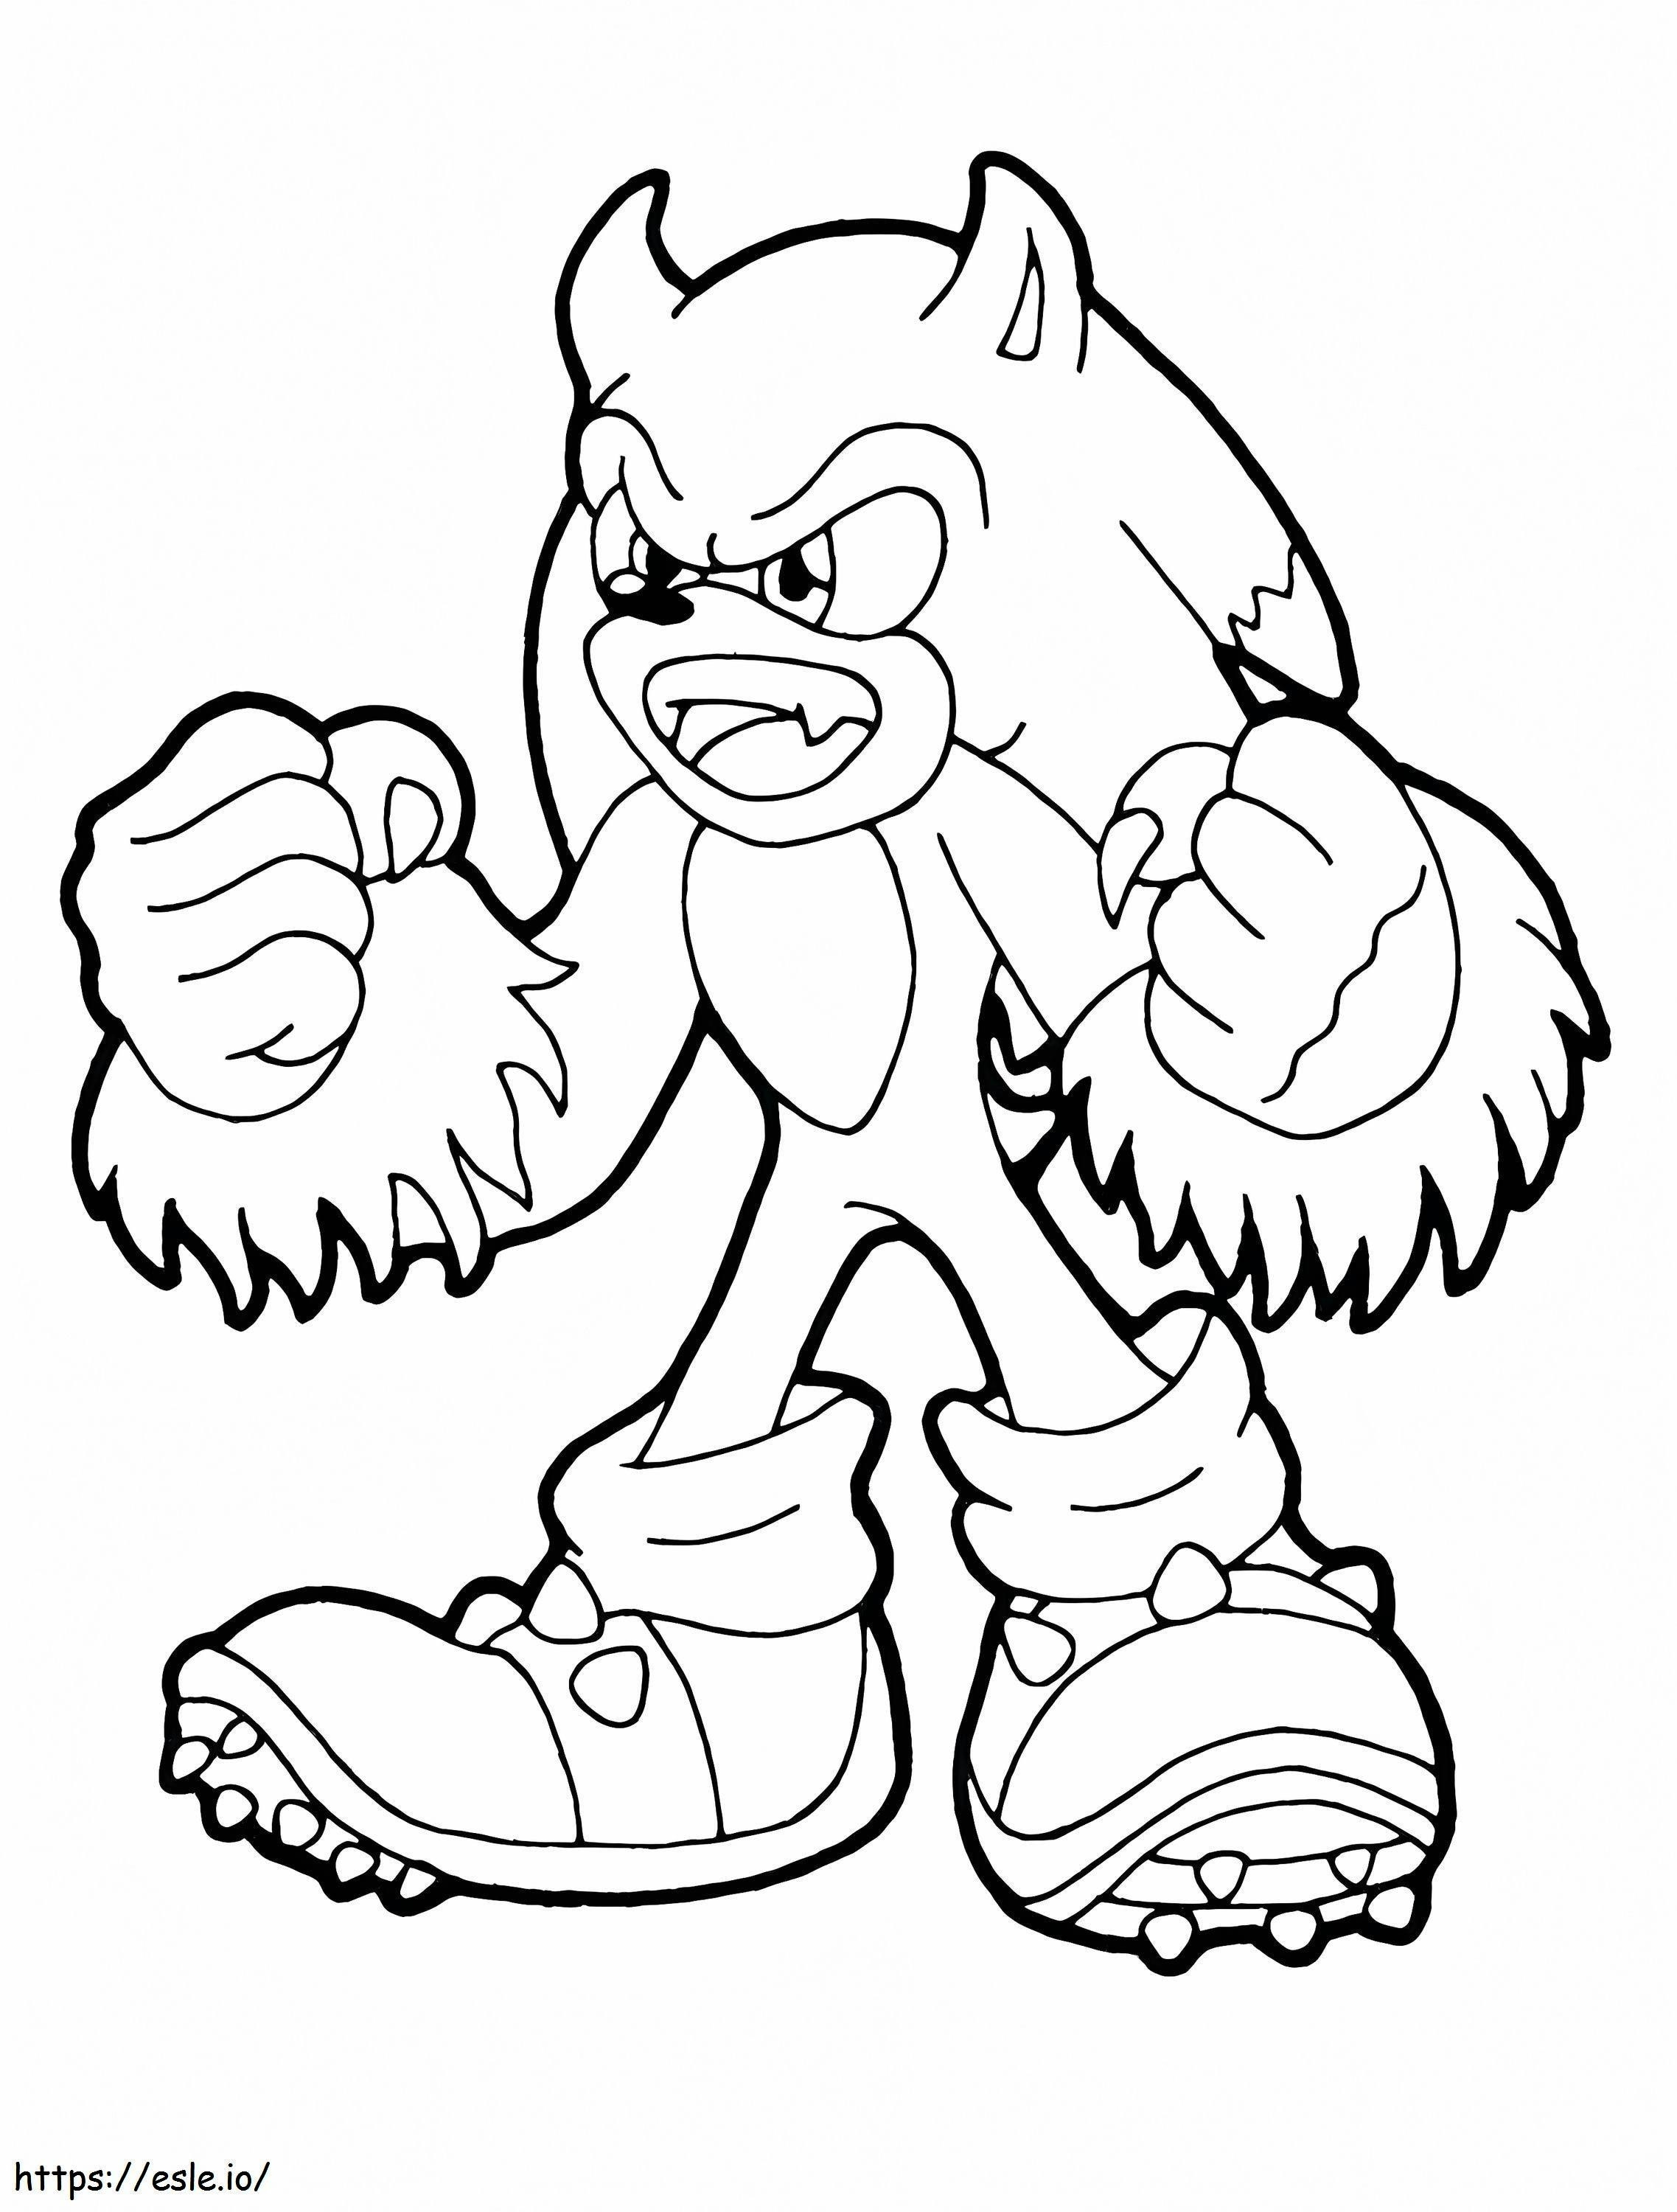 1573434490 Sonic Printable Sonic Knuckles Sonic Boom Sonic The Hedgehog Online coloring page